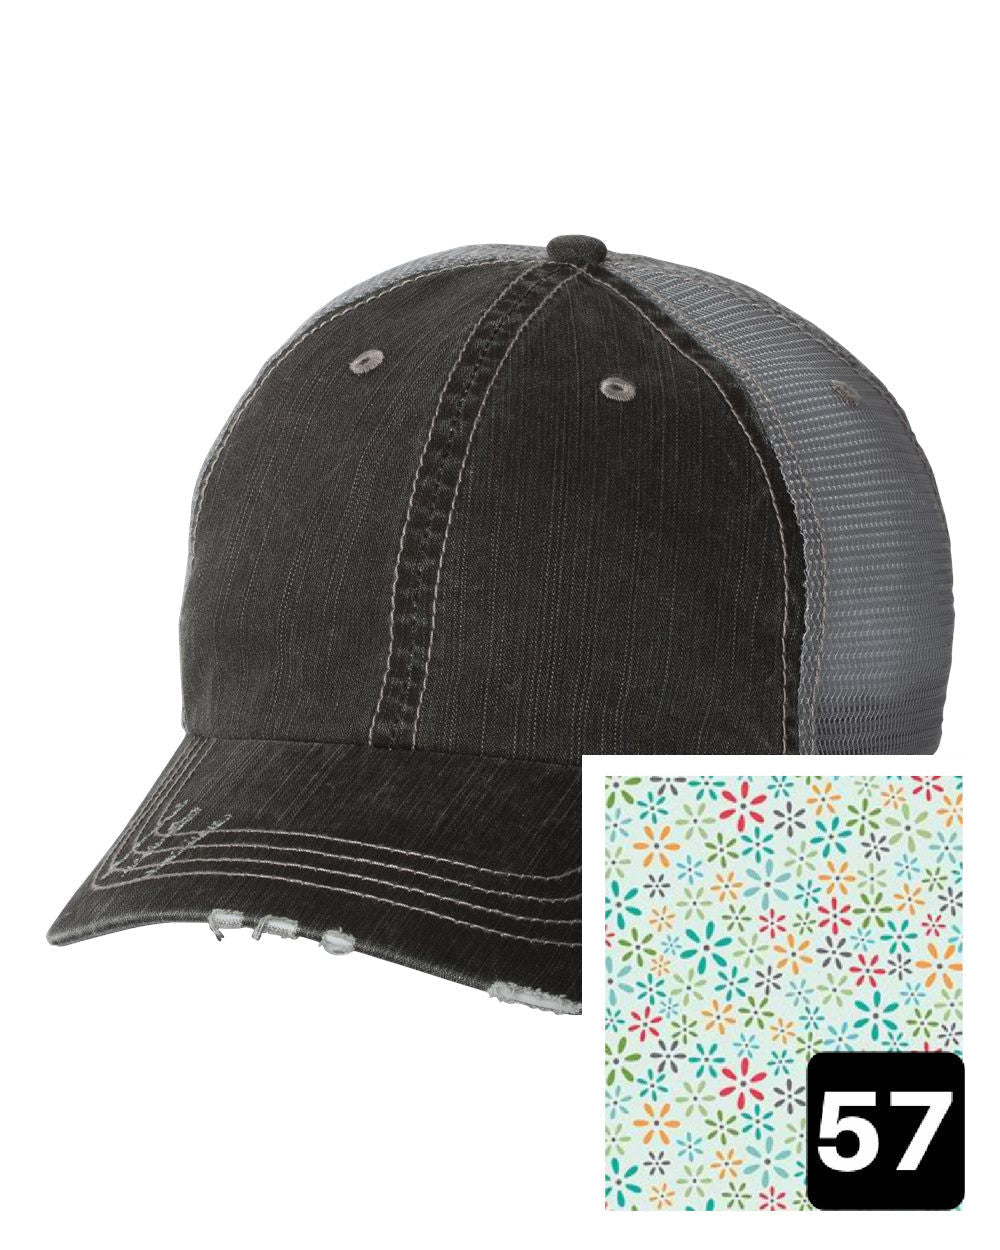 gray distressed trucker hat with white daisy on yellow fabric state of Louisiana